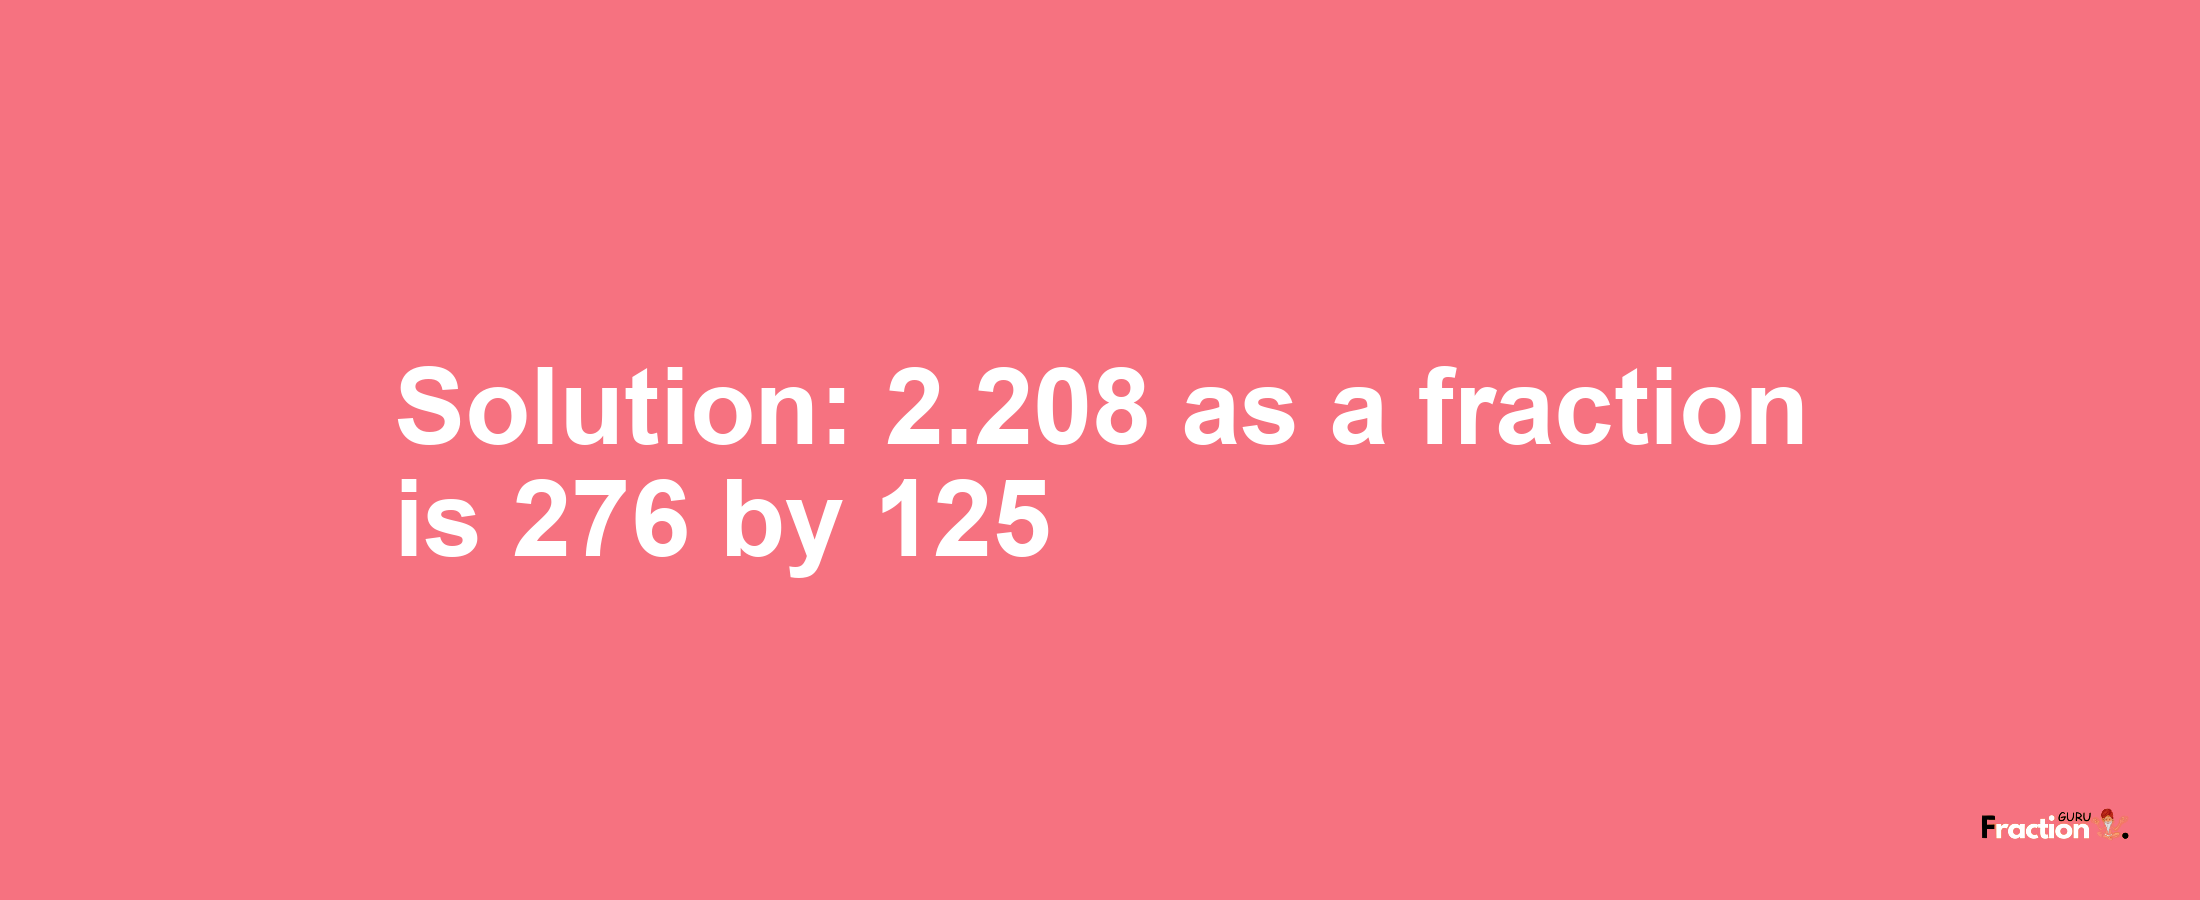 Solution:2.208 as a fraction is 276/125